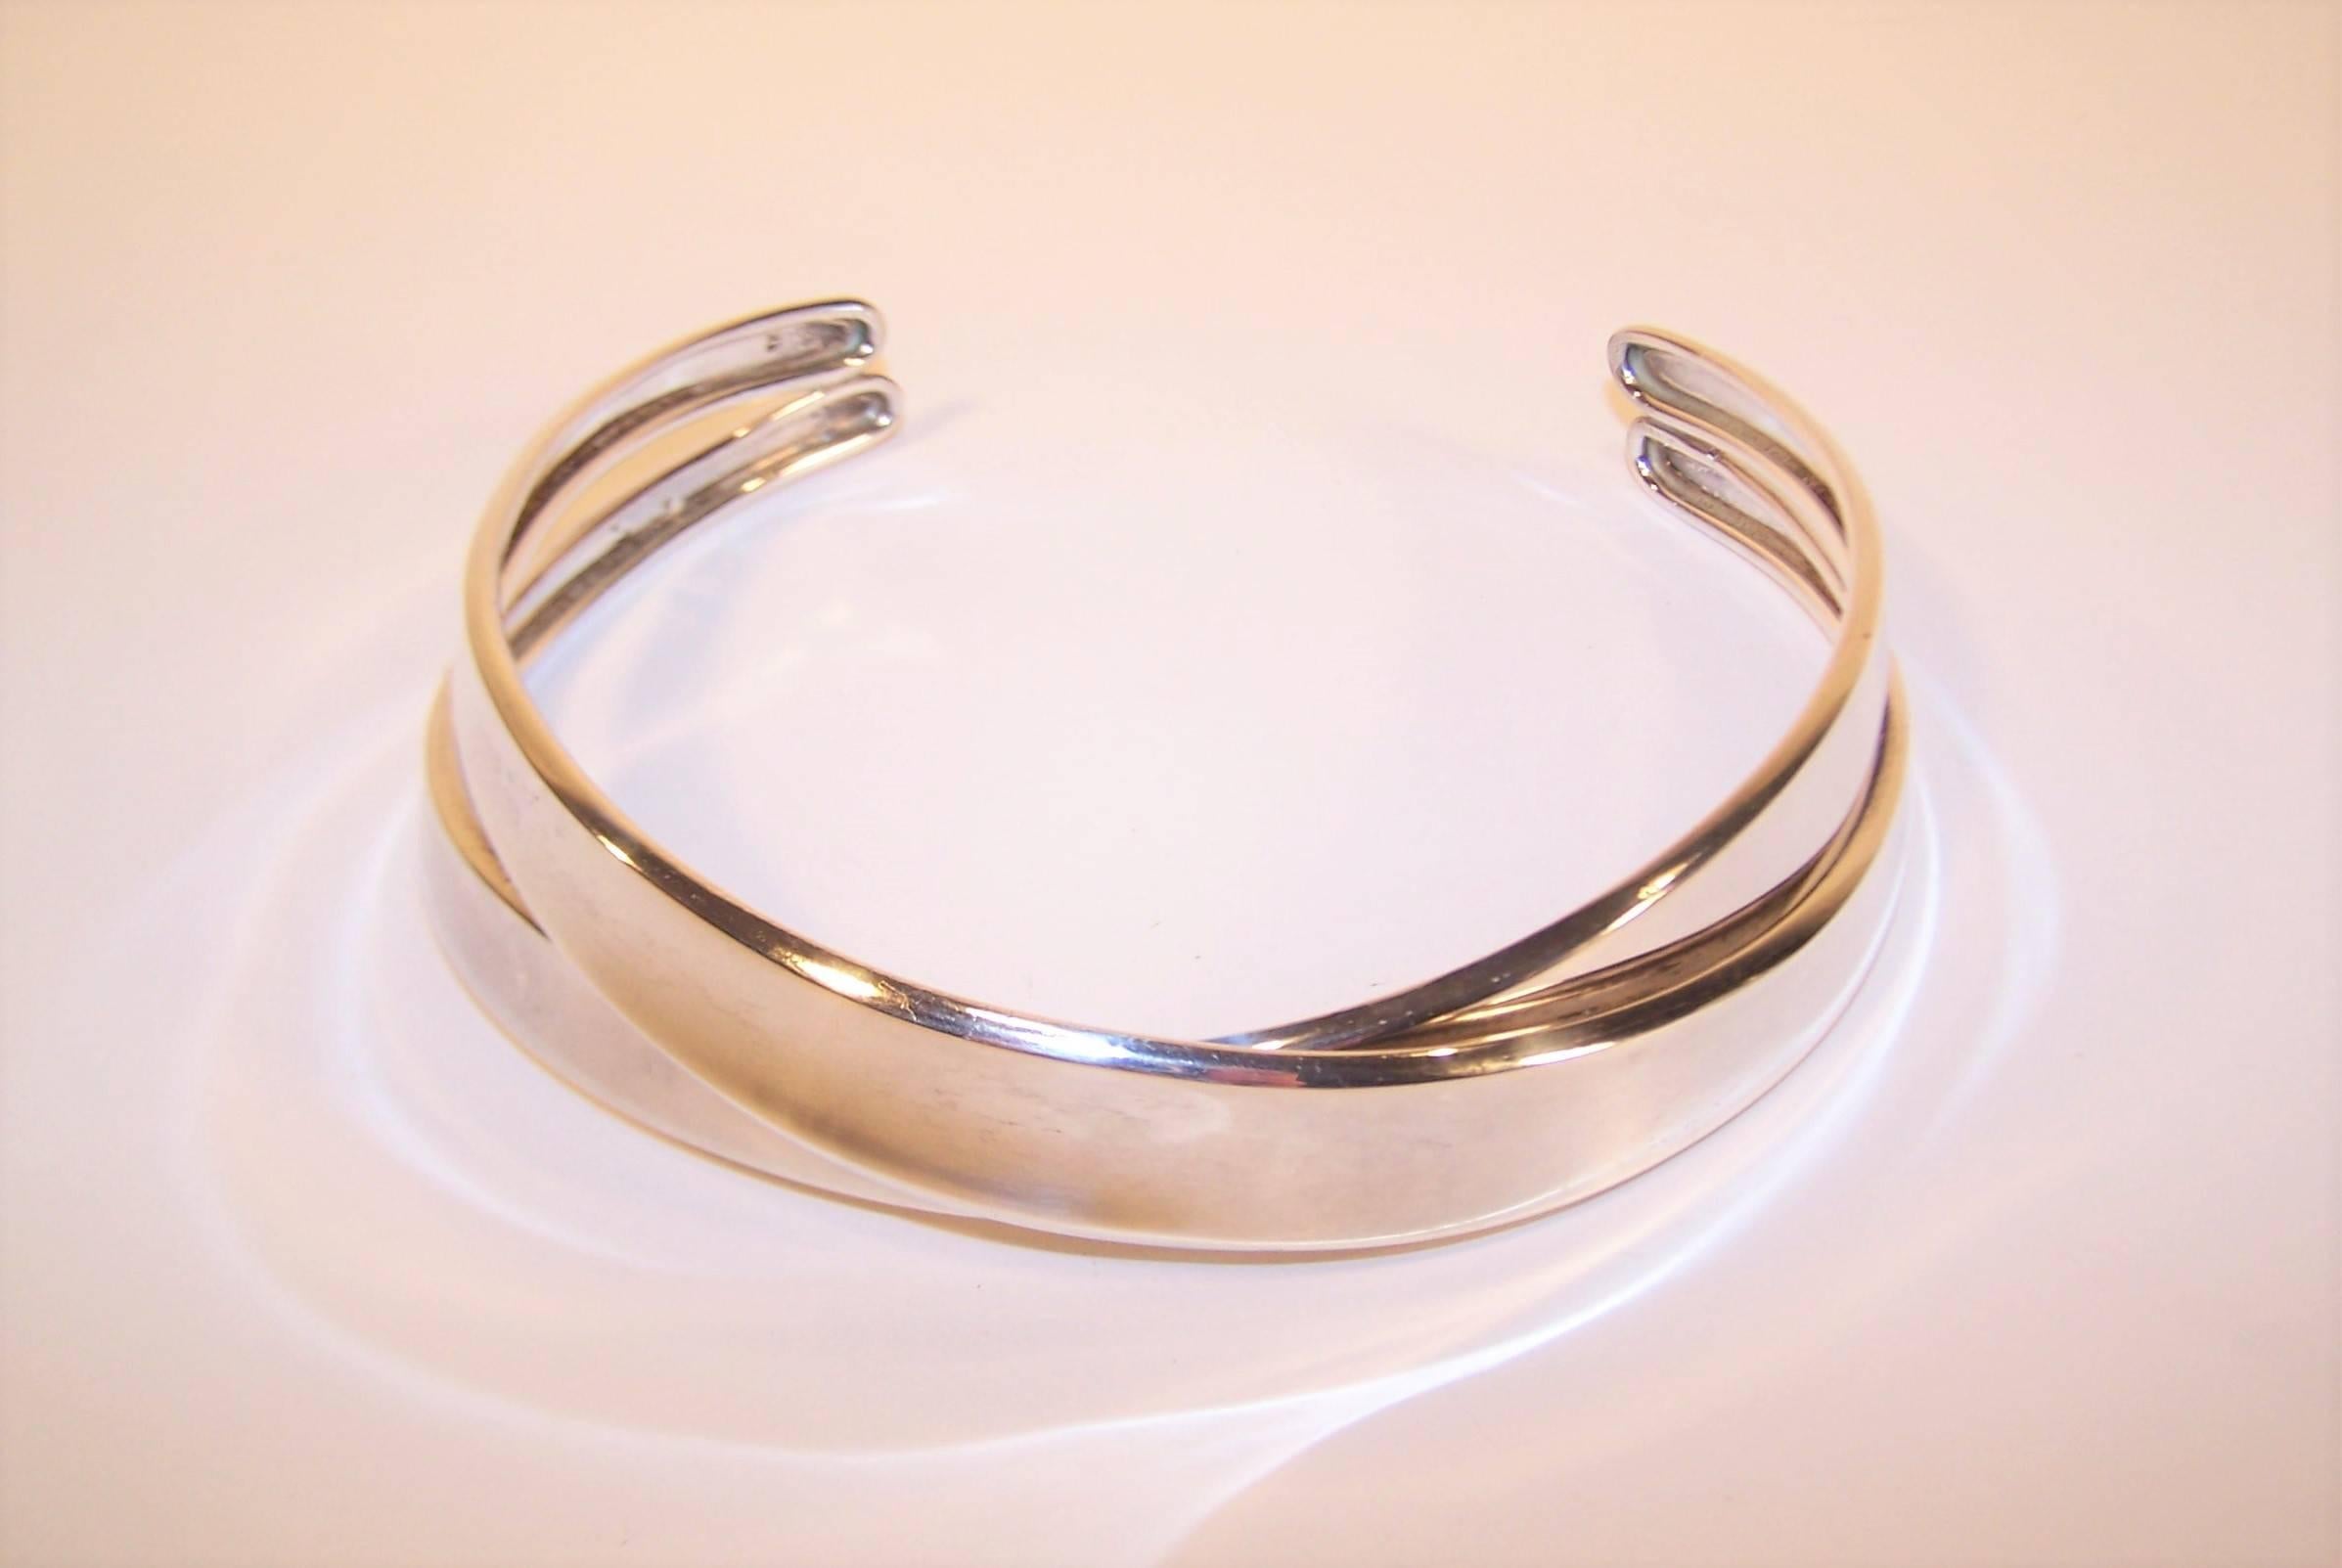 Women's Modernist C.1990 Robert Lee Morris Sterling Silver Twisted Collar Necklace